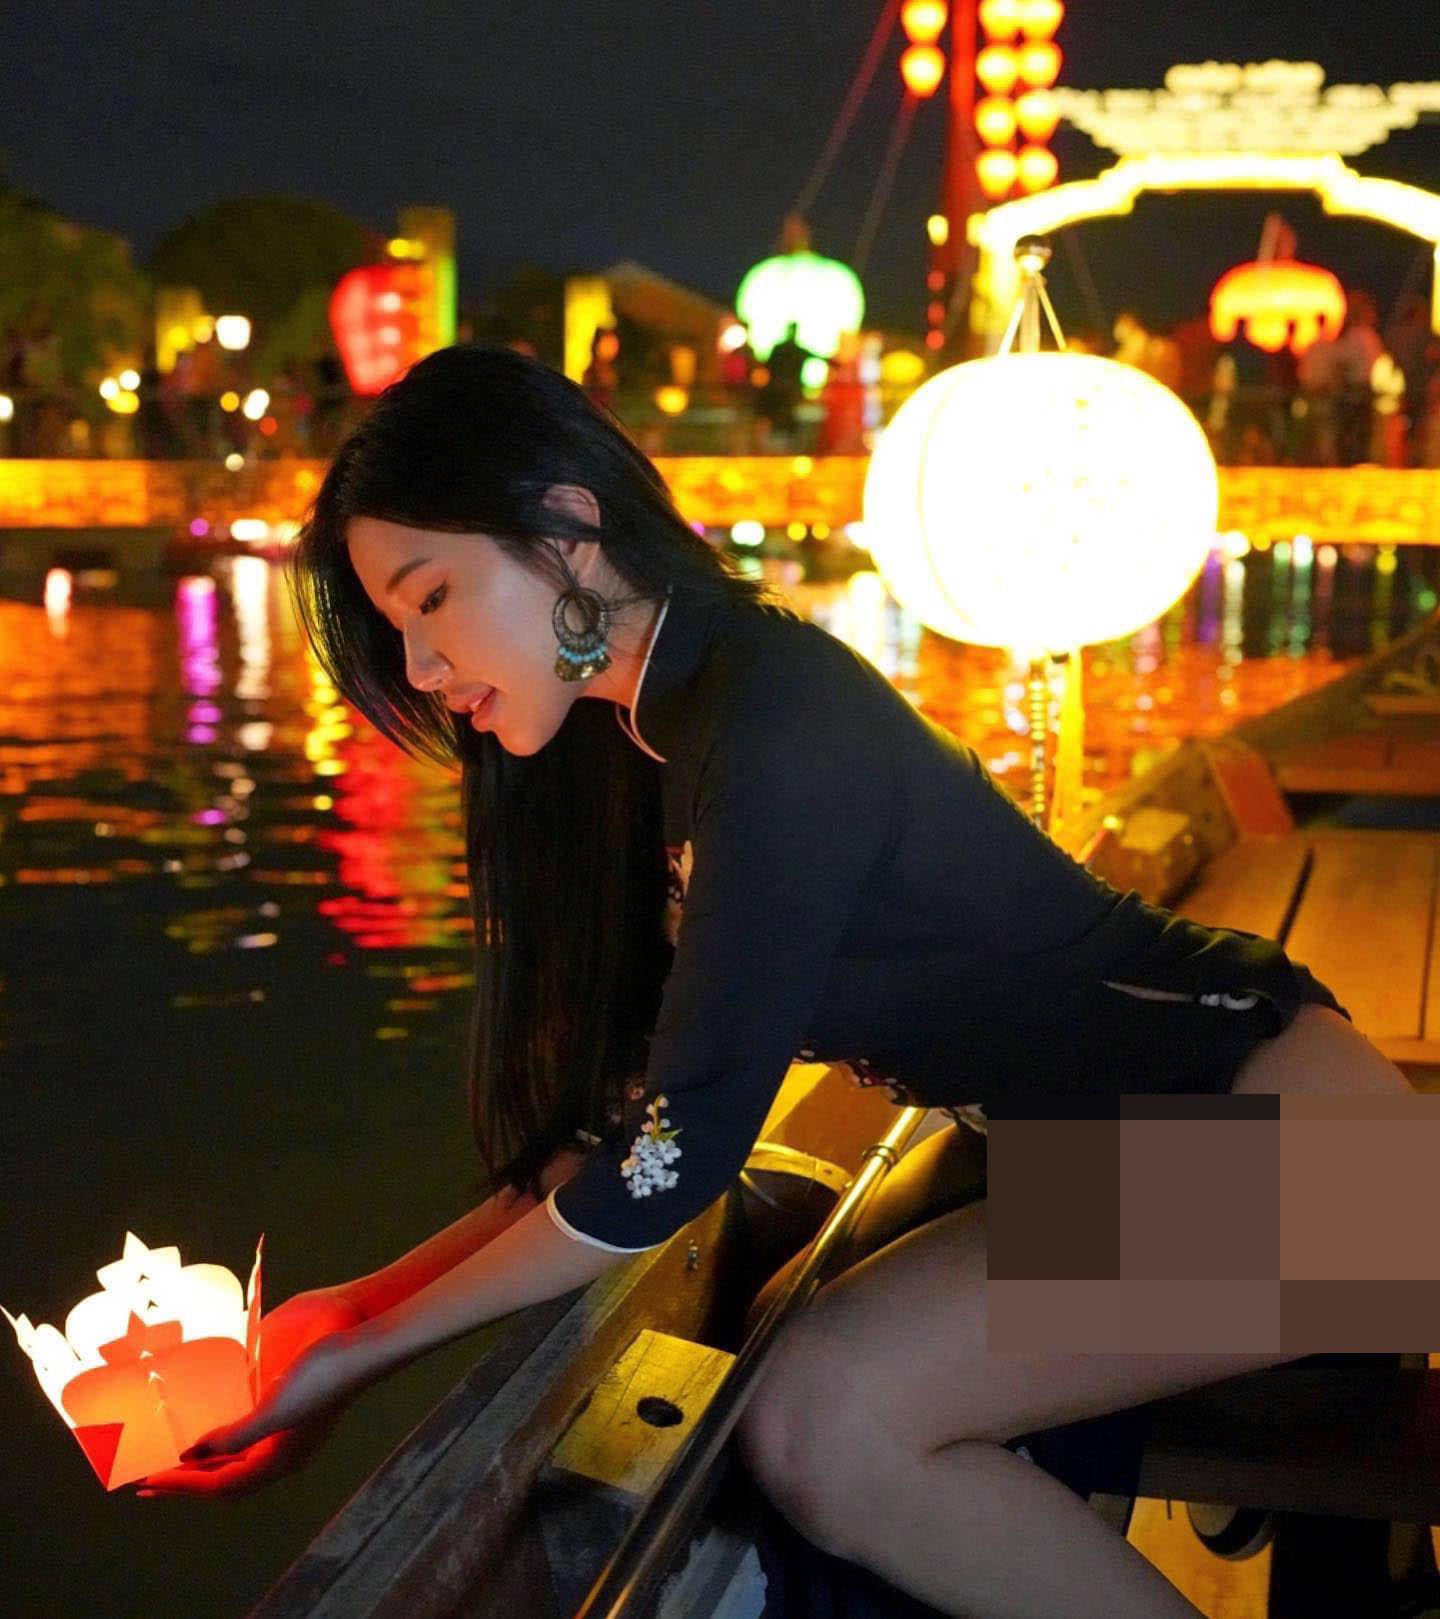 Famous model criticized for wearing ao dai showing off her underwear in Hoi An - 4